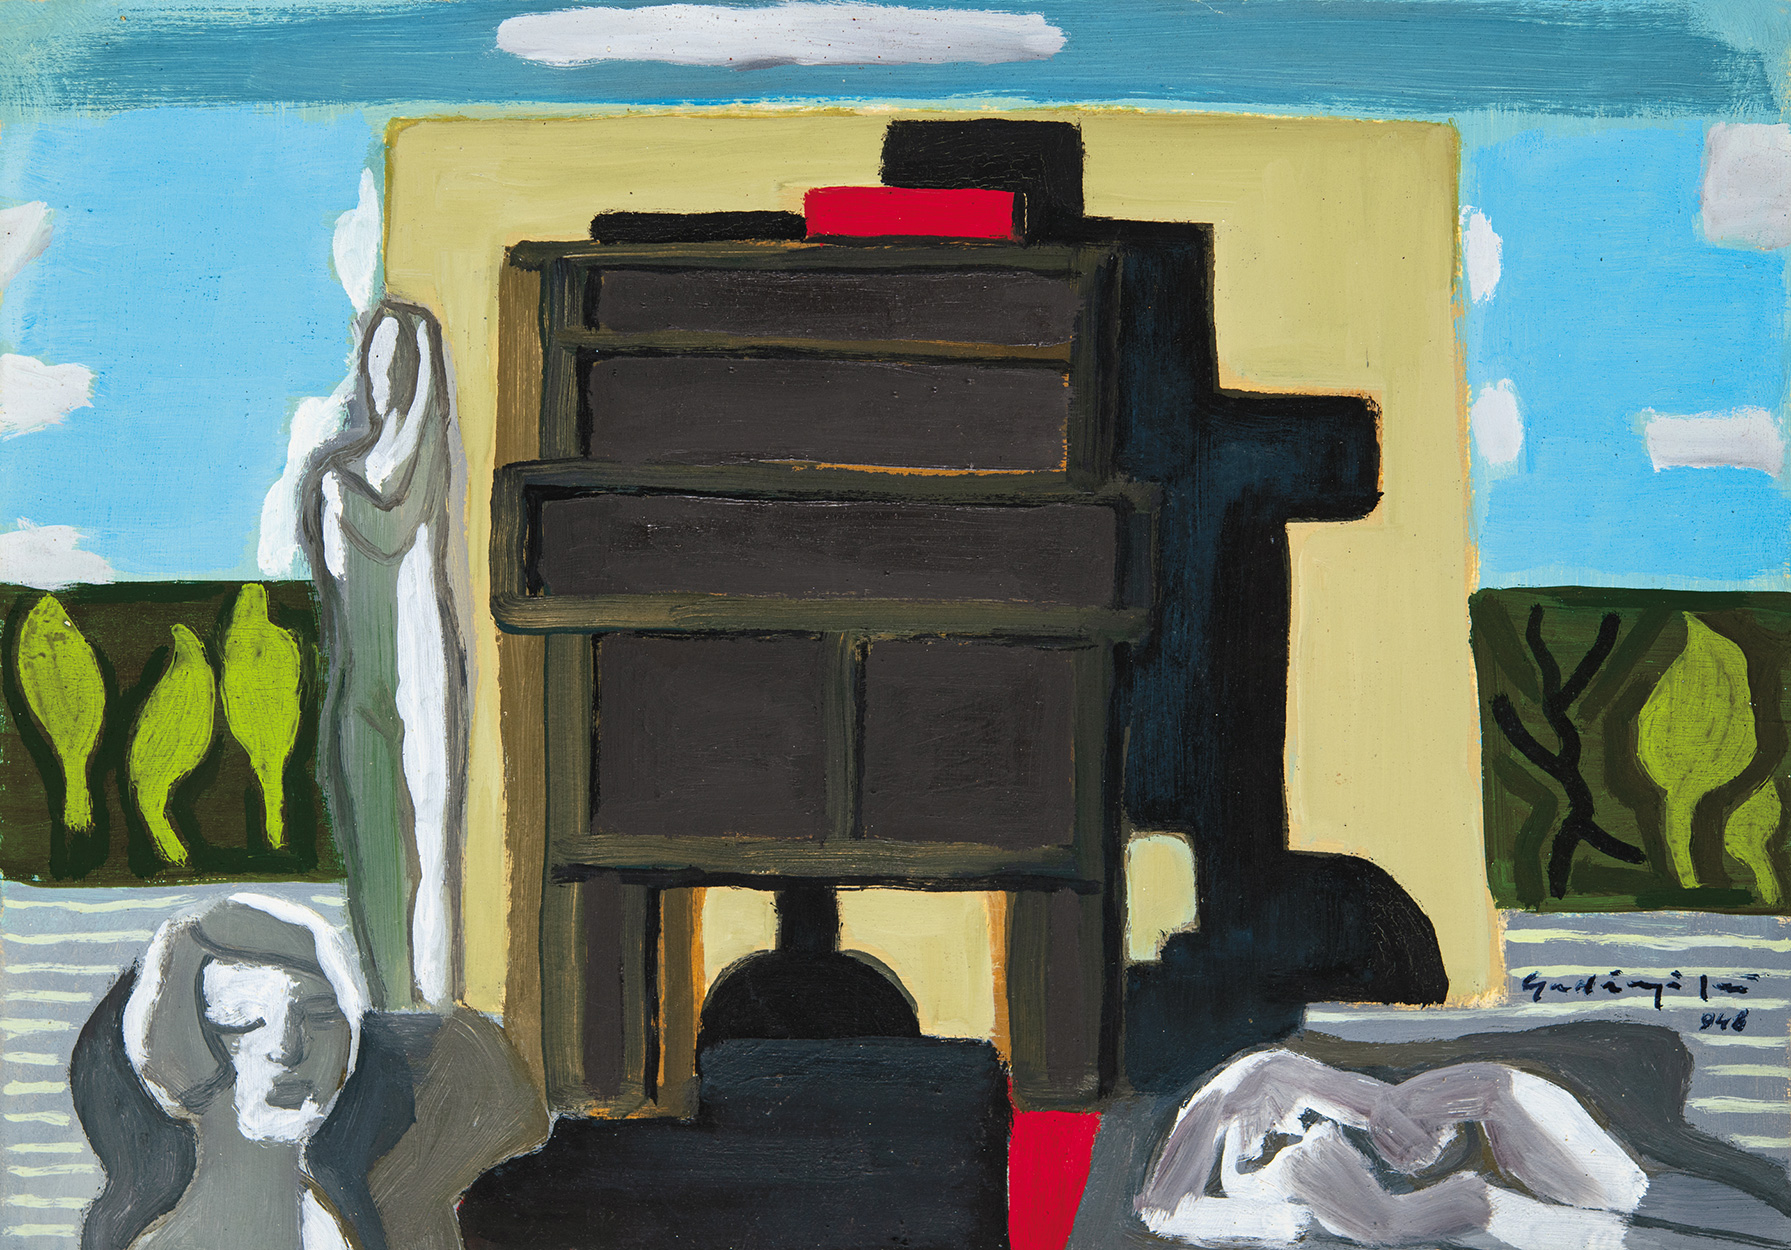 Gadányi Jenő (1896-1960) Composition (Closed Forms in Open Space), 1948